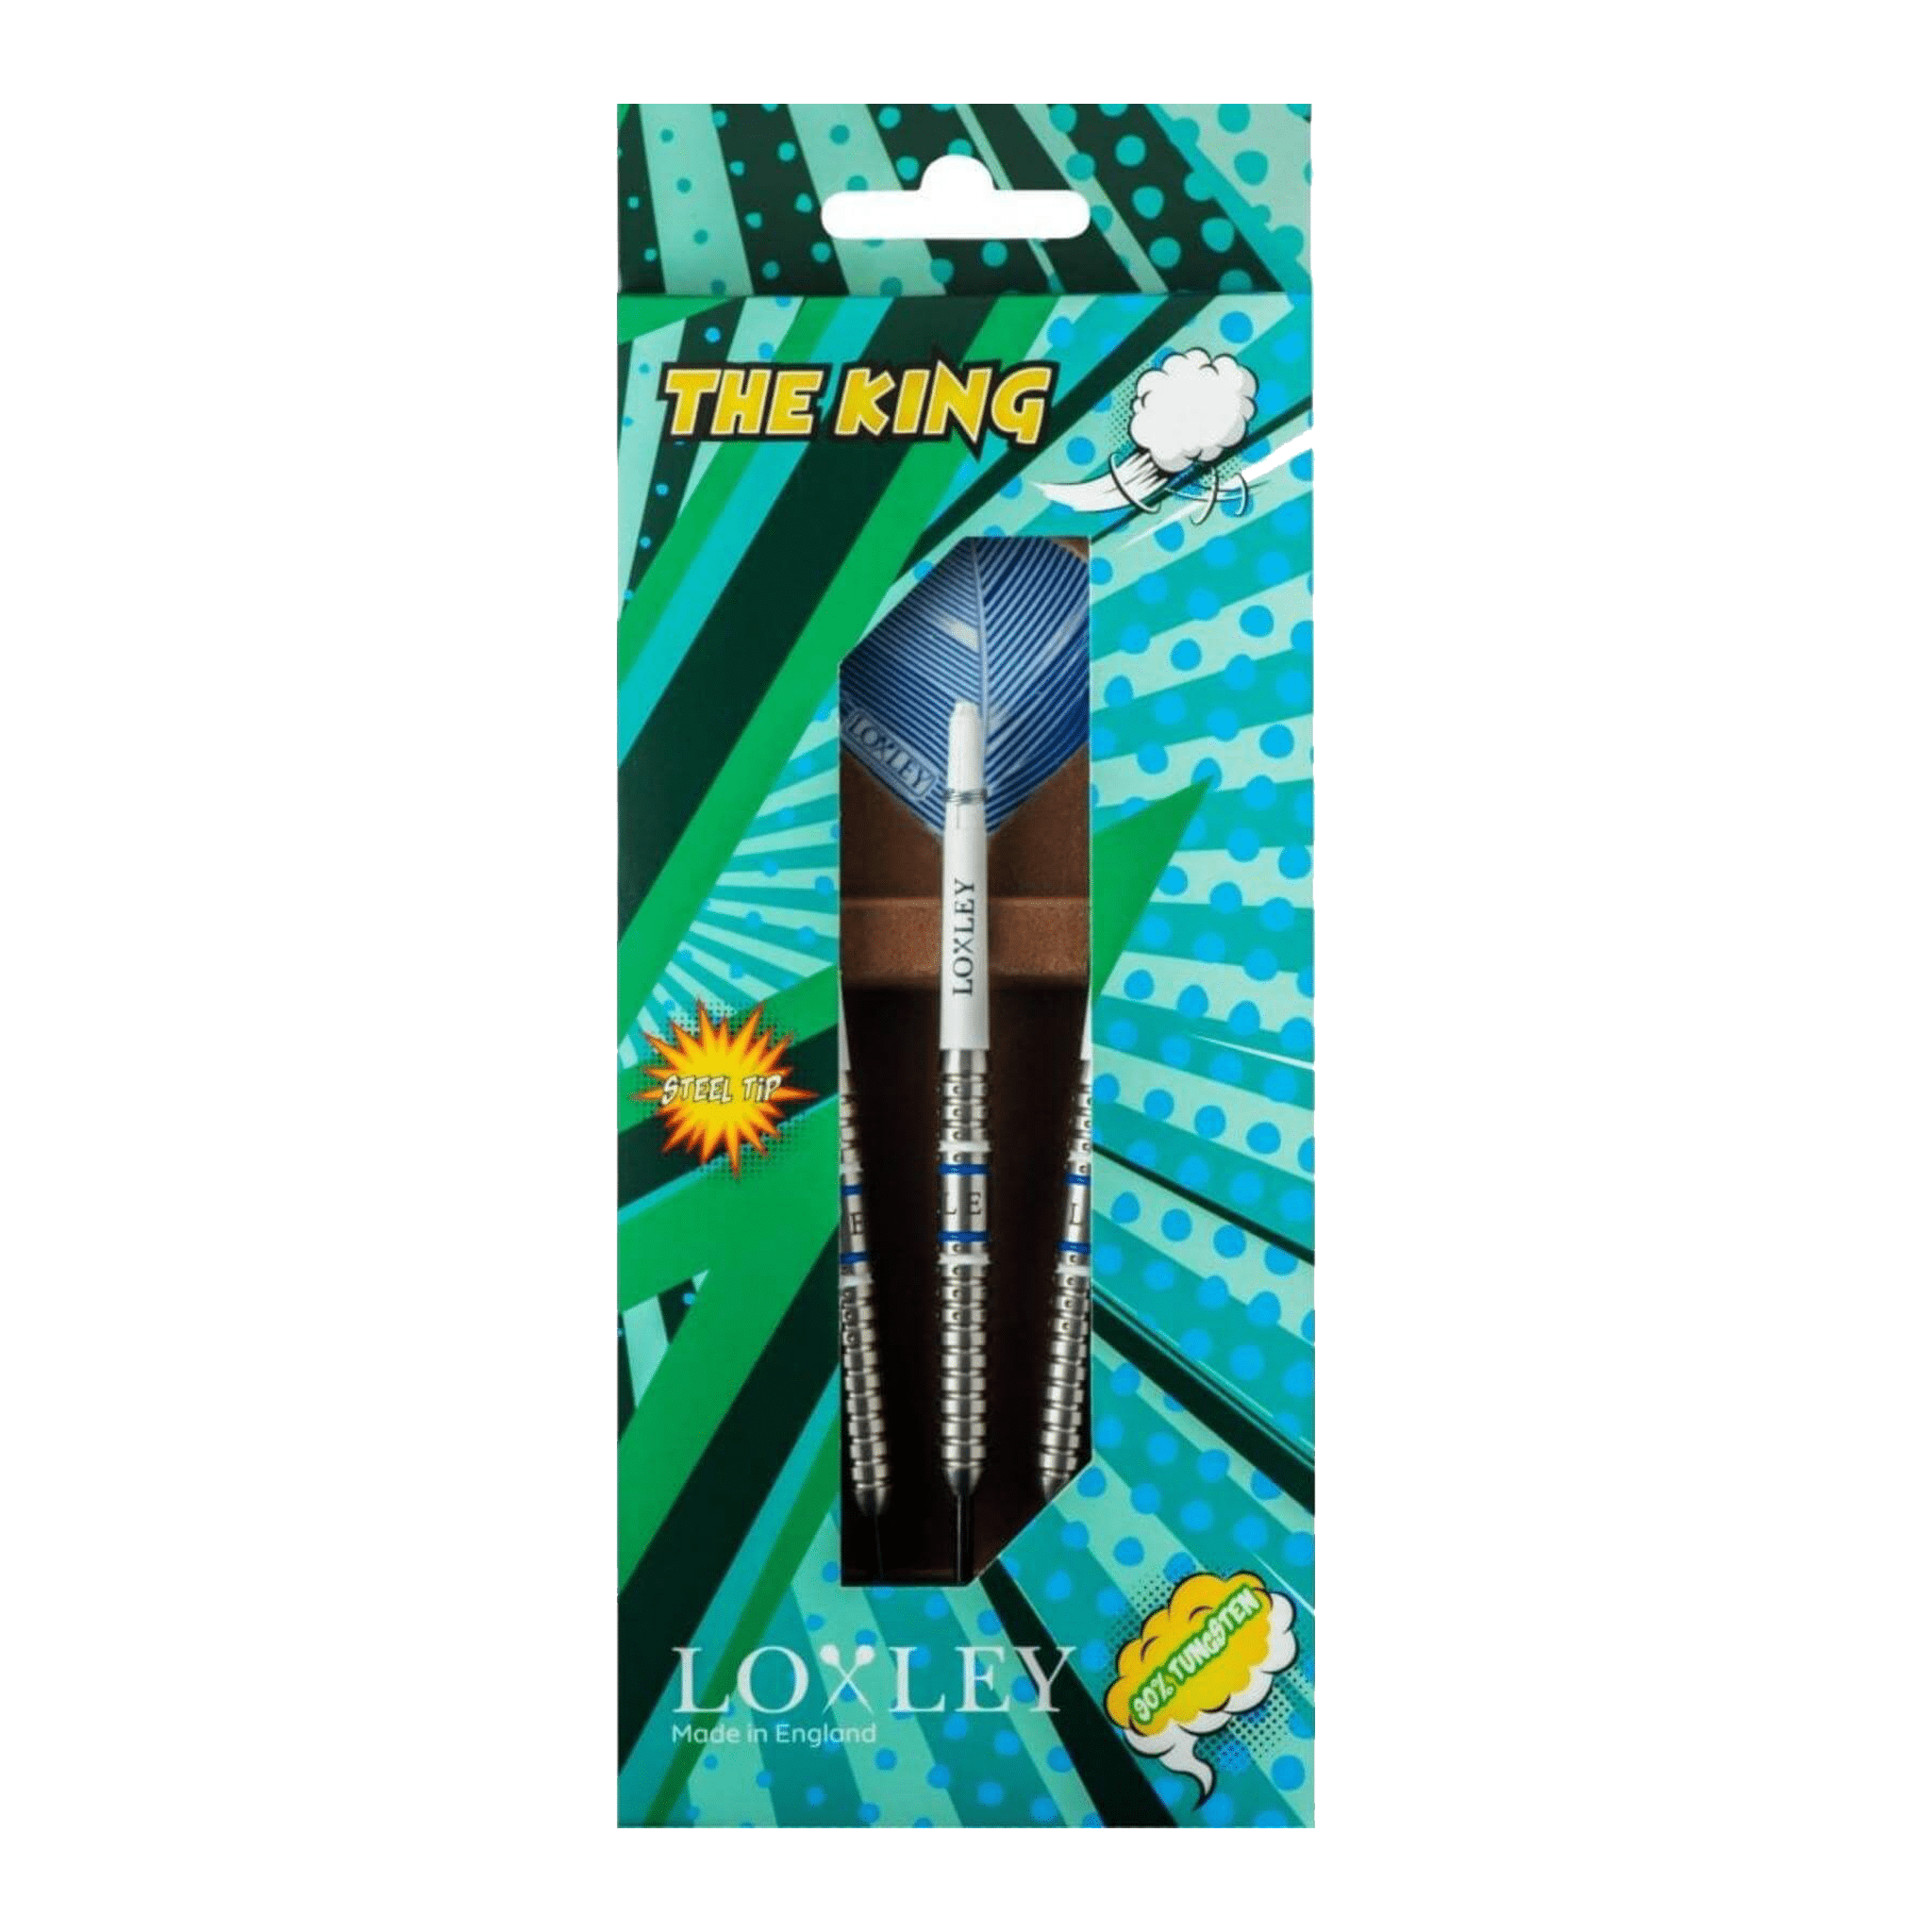 Loxley The King - 90% Tungsten Steel Tip Darts 24 Grams Darts